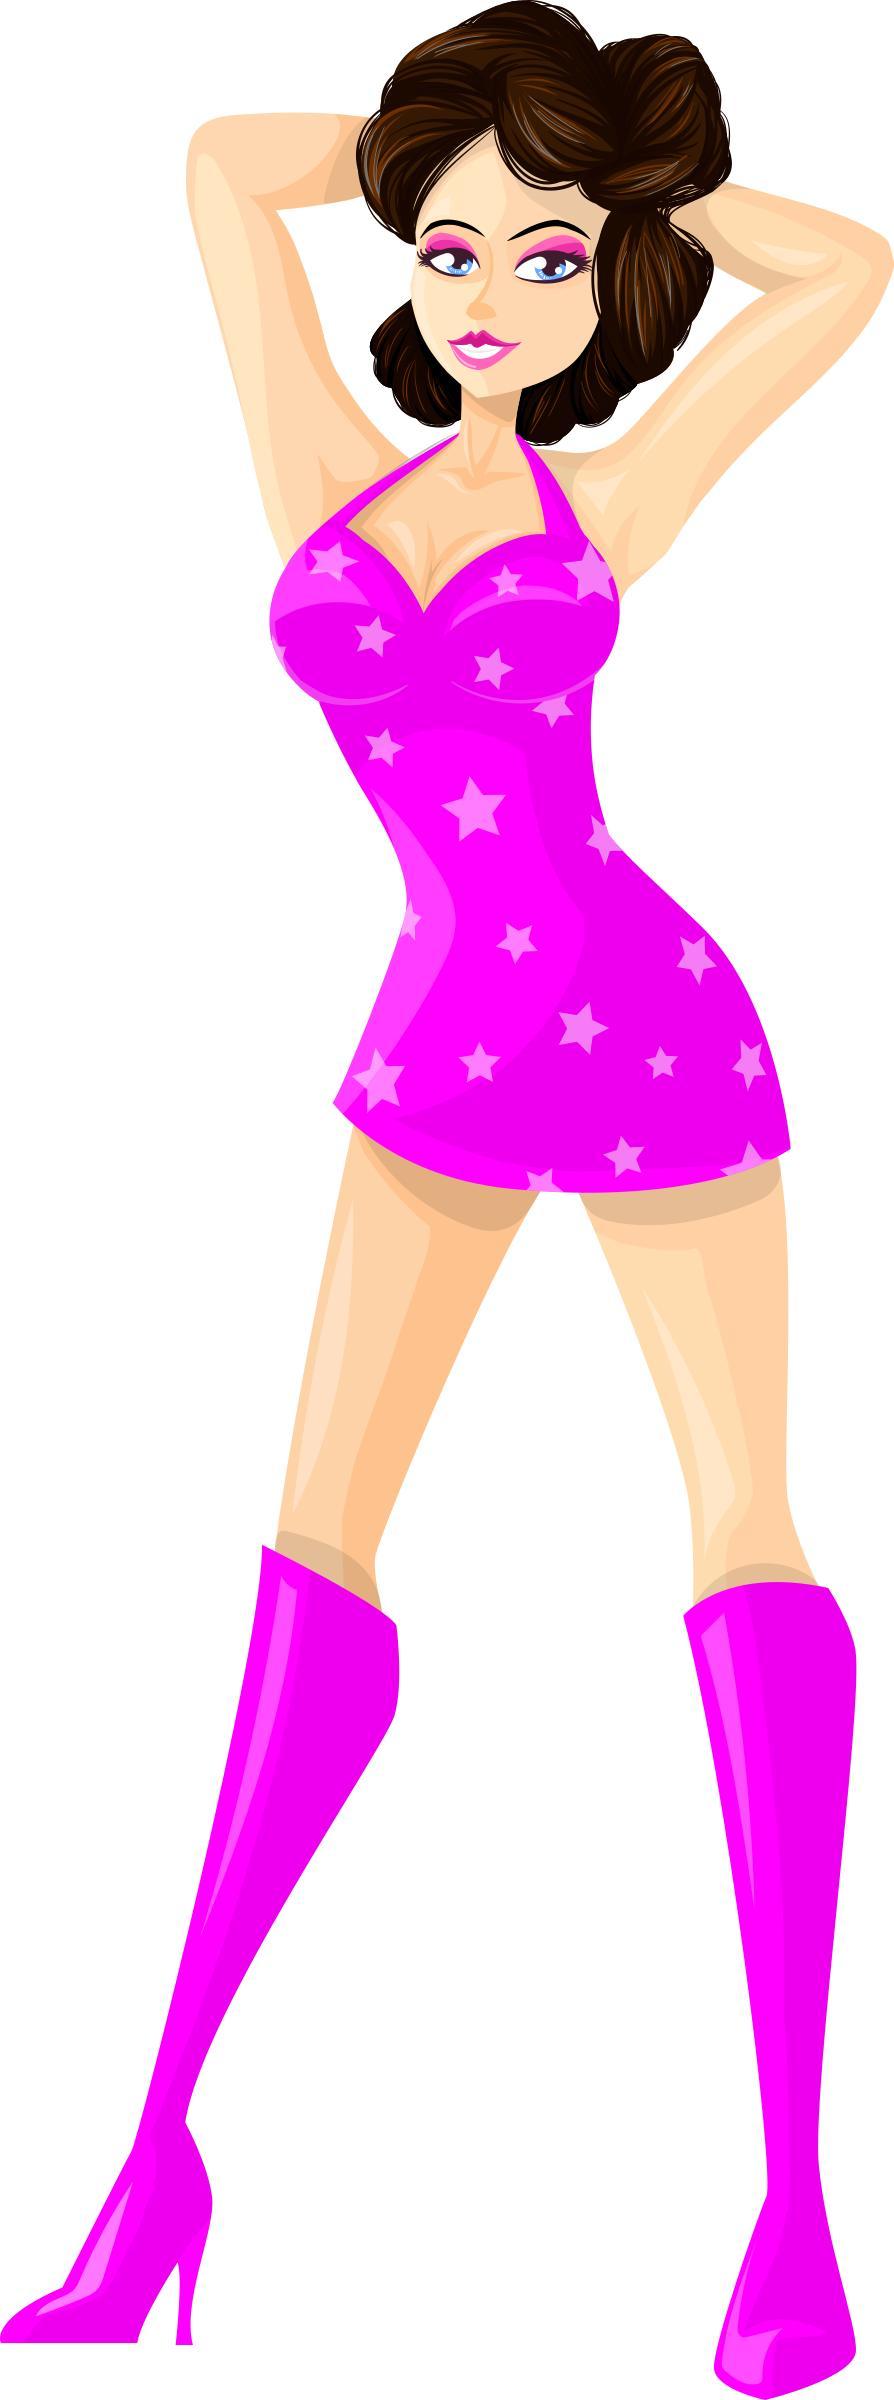 Young lady 2 (brown hair, light skin, starry dress #6) png transparent